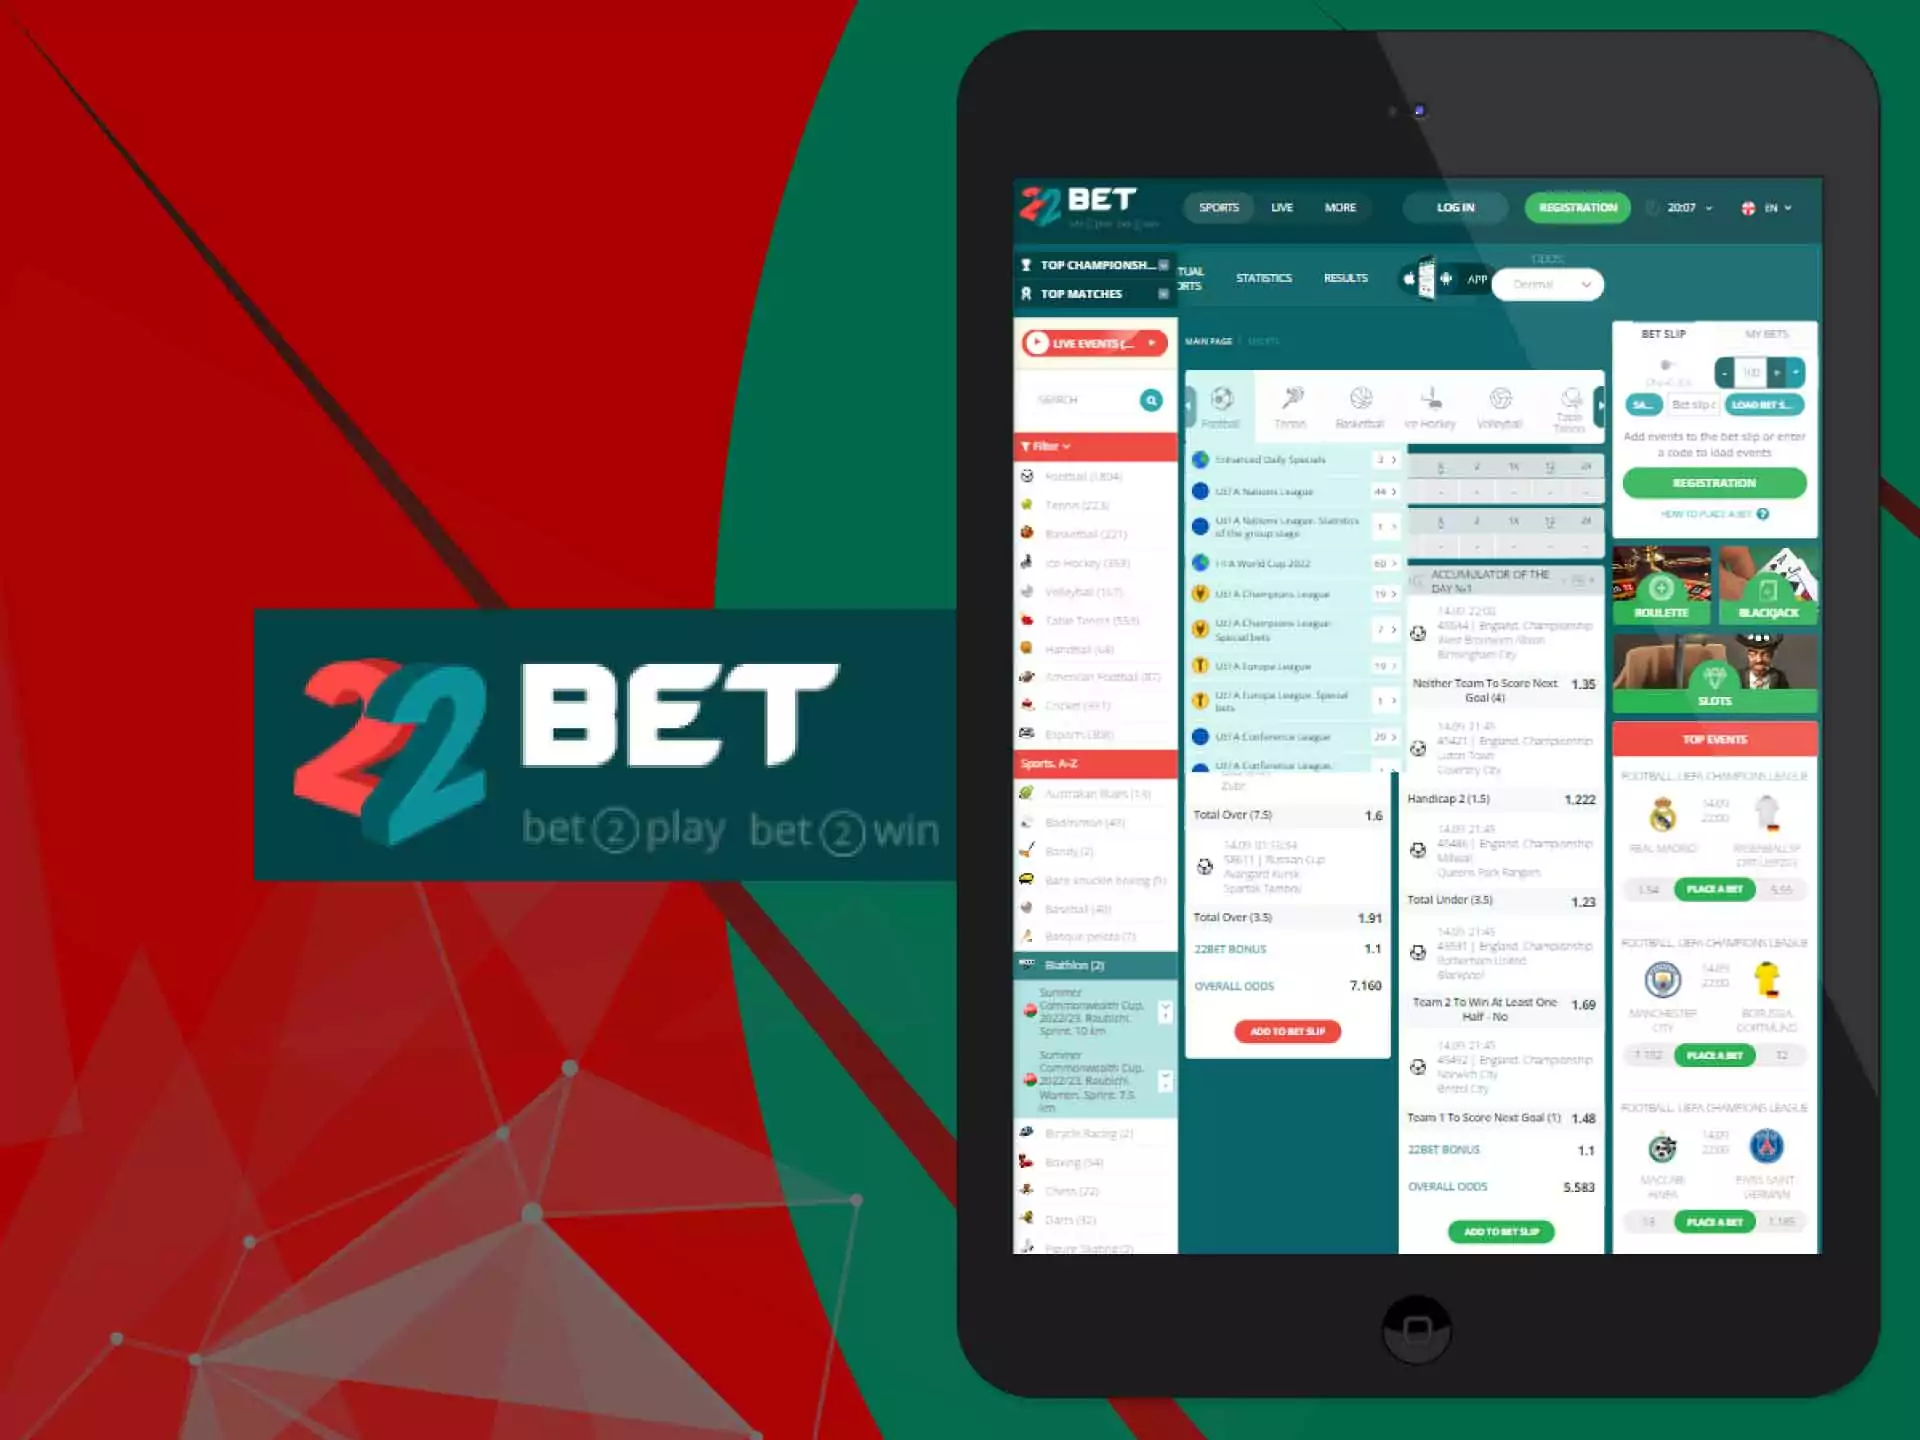 You can place total bets in the 22Bet app.